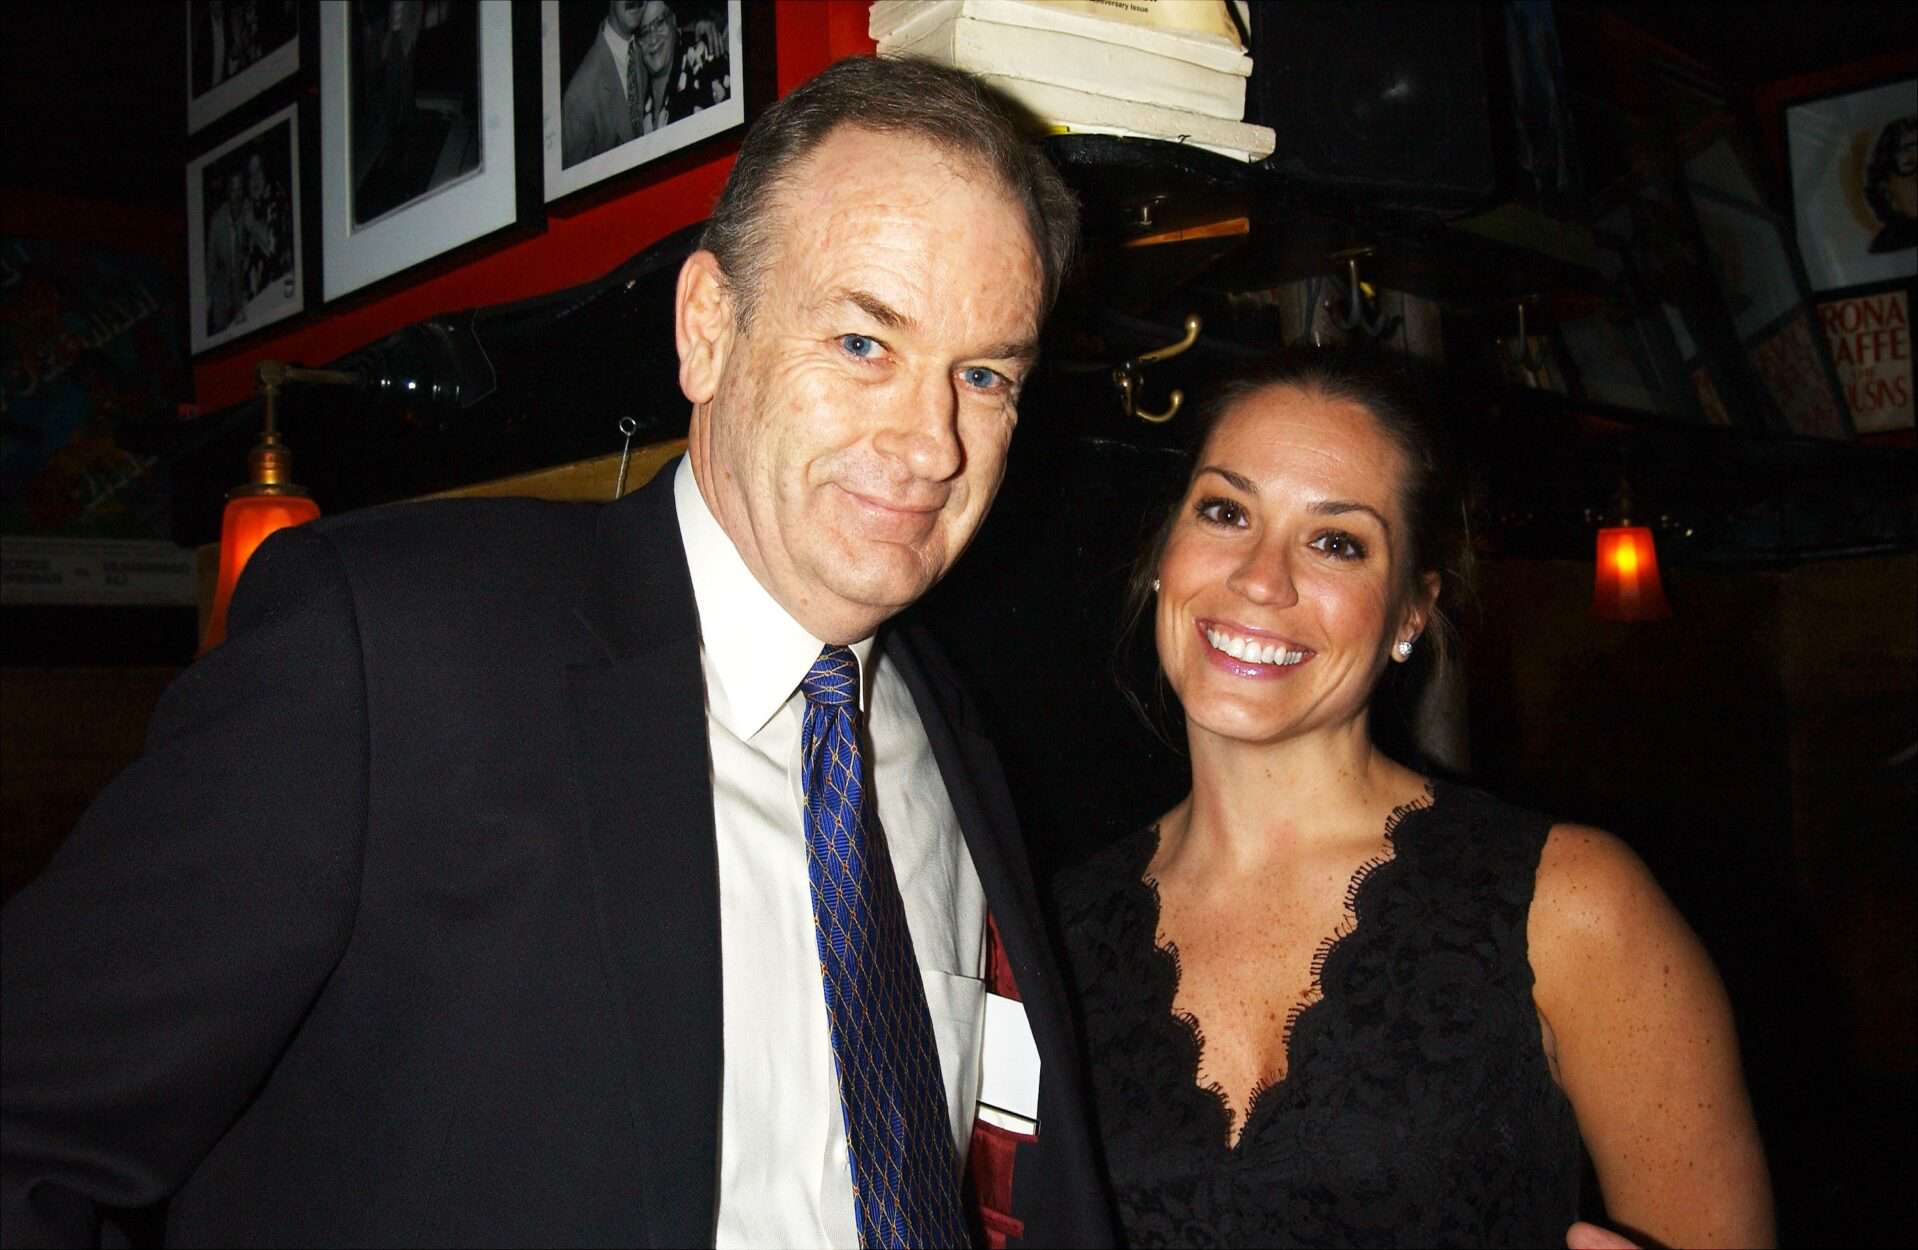 Bill O'Reilly's ex-wife and him